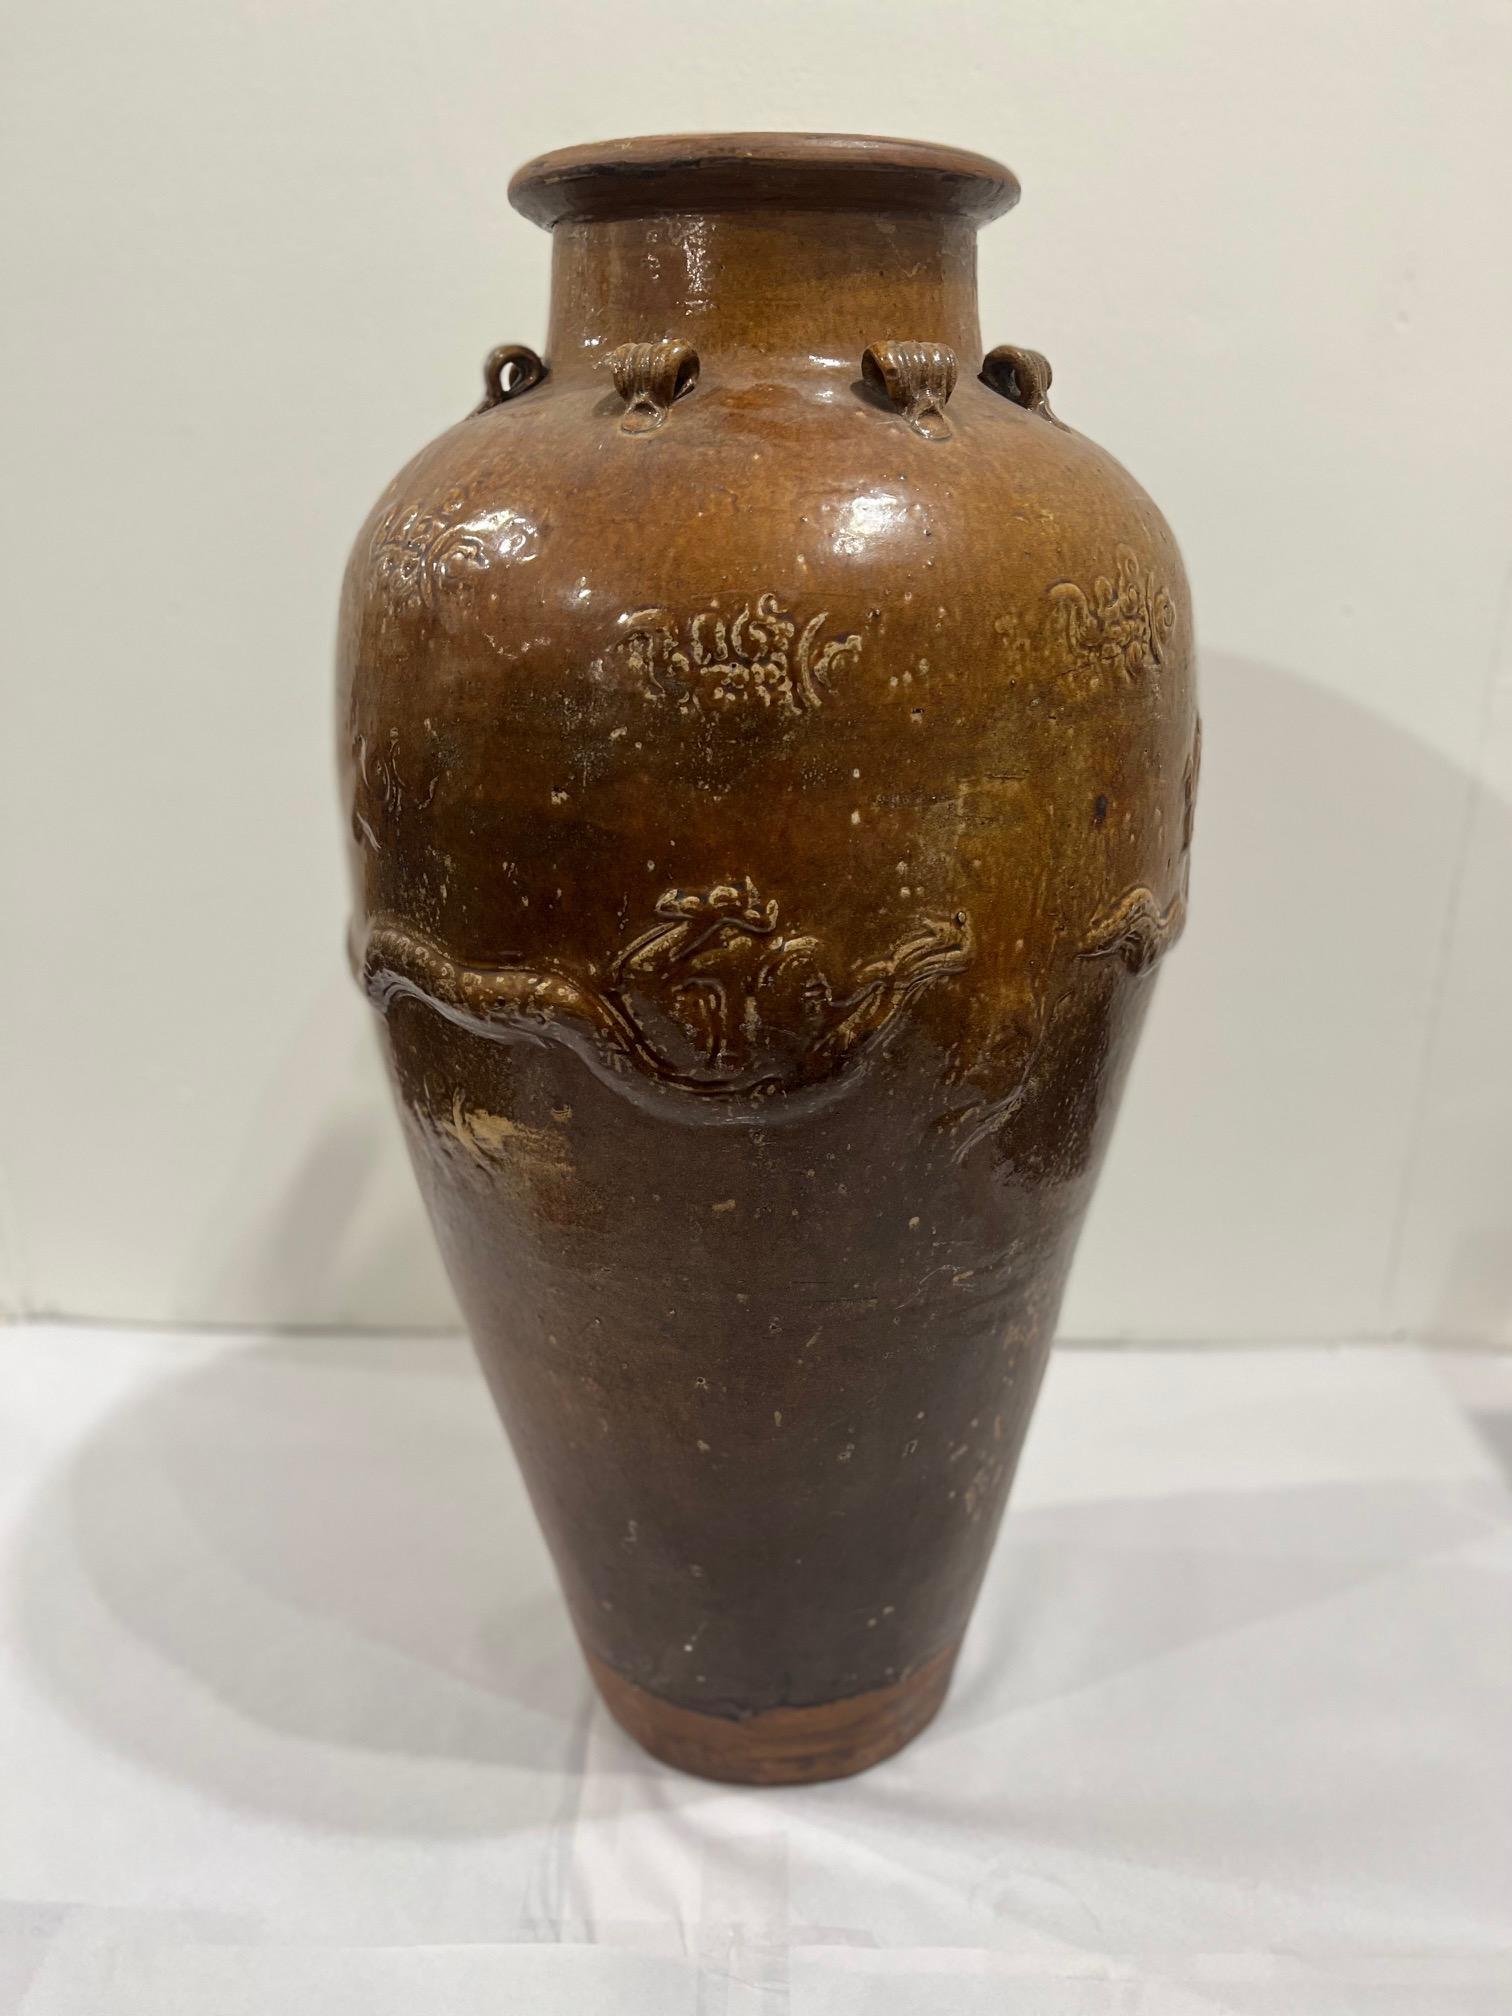 Large Martaban Ming dynasty stoneware storage vase with dragons, 14th century. Beautiful Ochoa and yellow brown glaze with decorated dragons and Ming clouds. Applied dragon loops for ropes to hold down lid for storage and transport on vessels